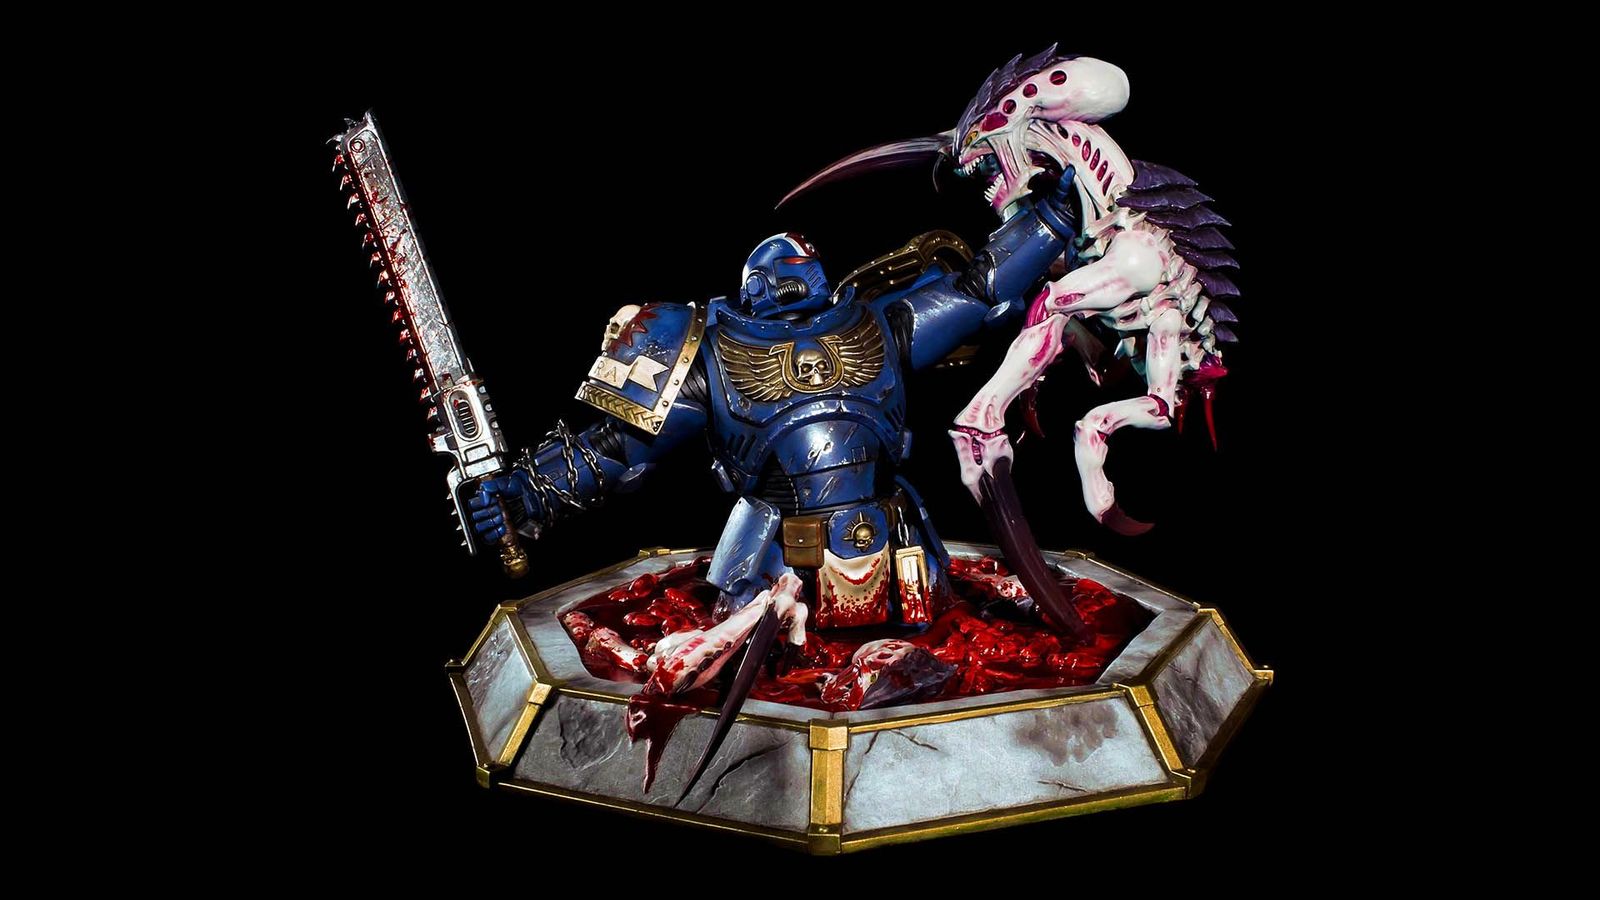 Warhammer 40k: Space Marine 2 - Lieutenant Titus resin statue, included in Space Marine 2's Collector's Edition